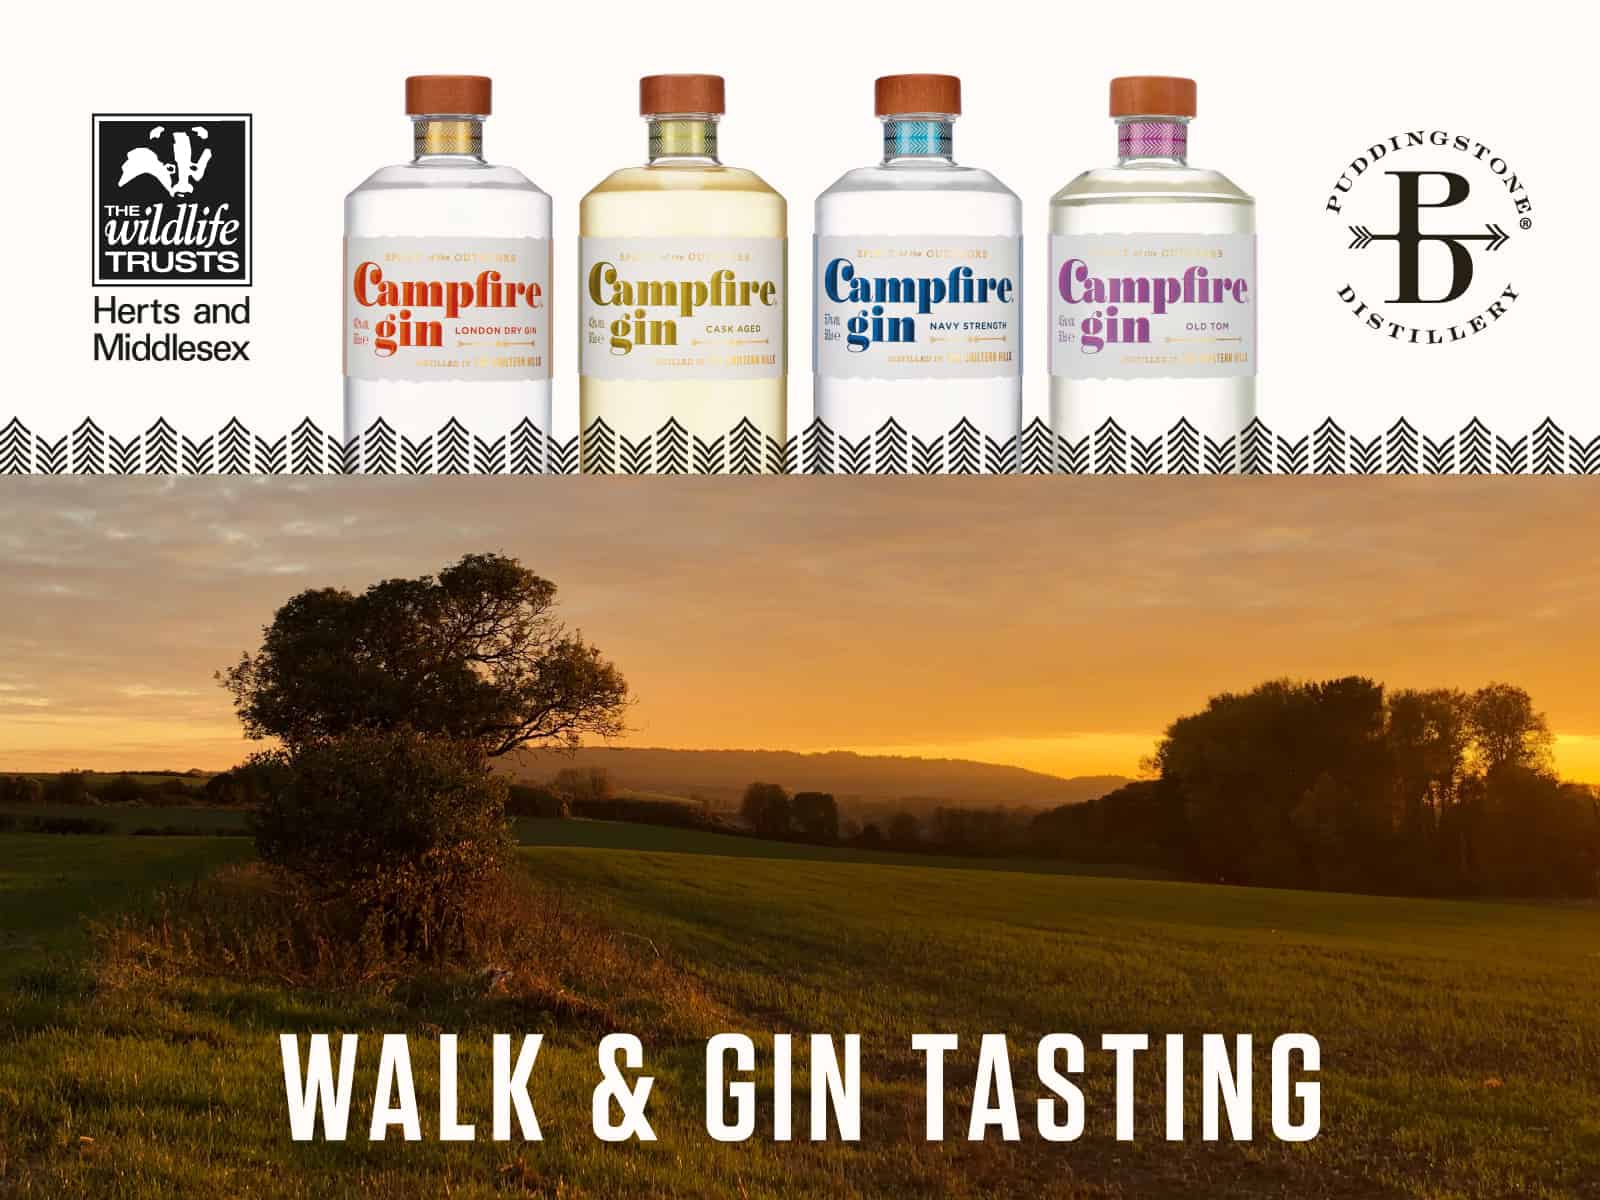 Walk & gin tasting with HMWT 2019